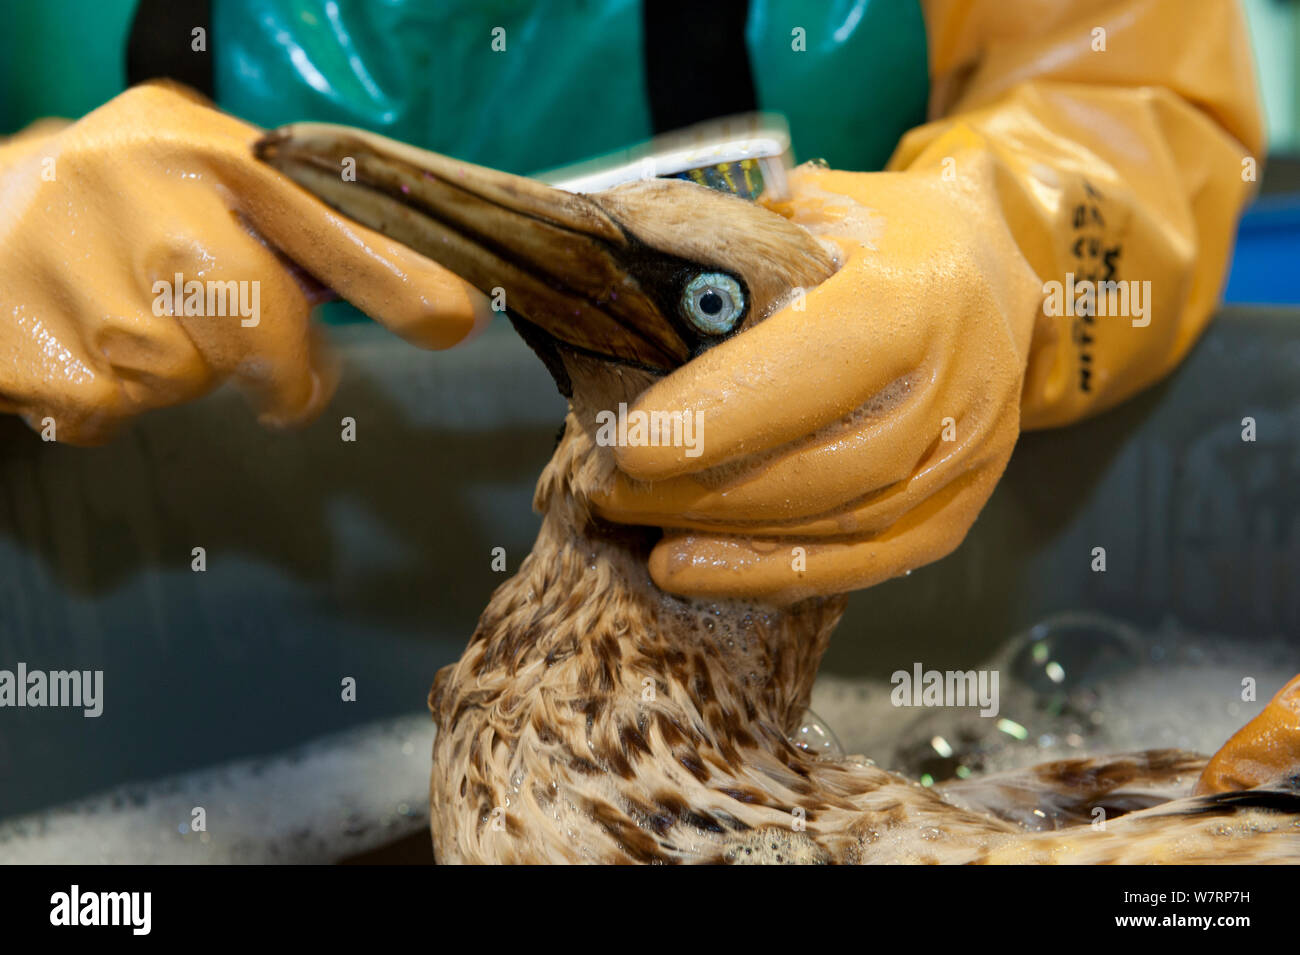 Cape Gannet (Morus capensis) being washed to remove oil from feathers, in rehabilitation at the Southern African Foundation for the Conservation of Coastal Birds (SANCCOB). Cape Town, South Africa. December 2011. Stock Photo